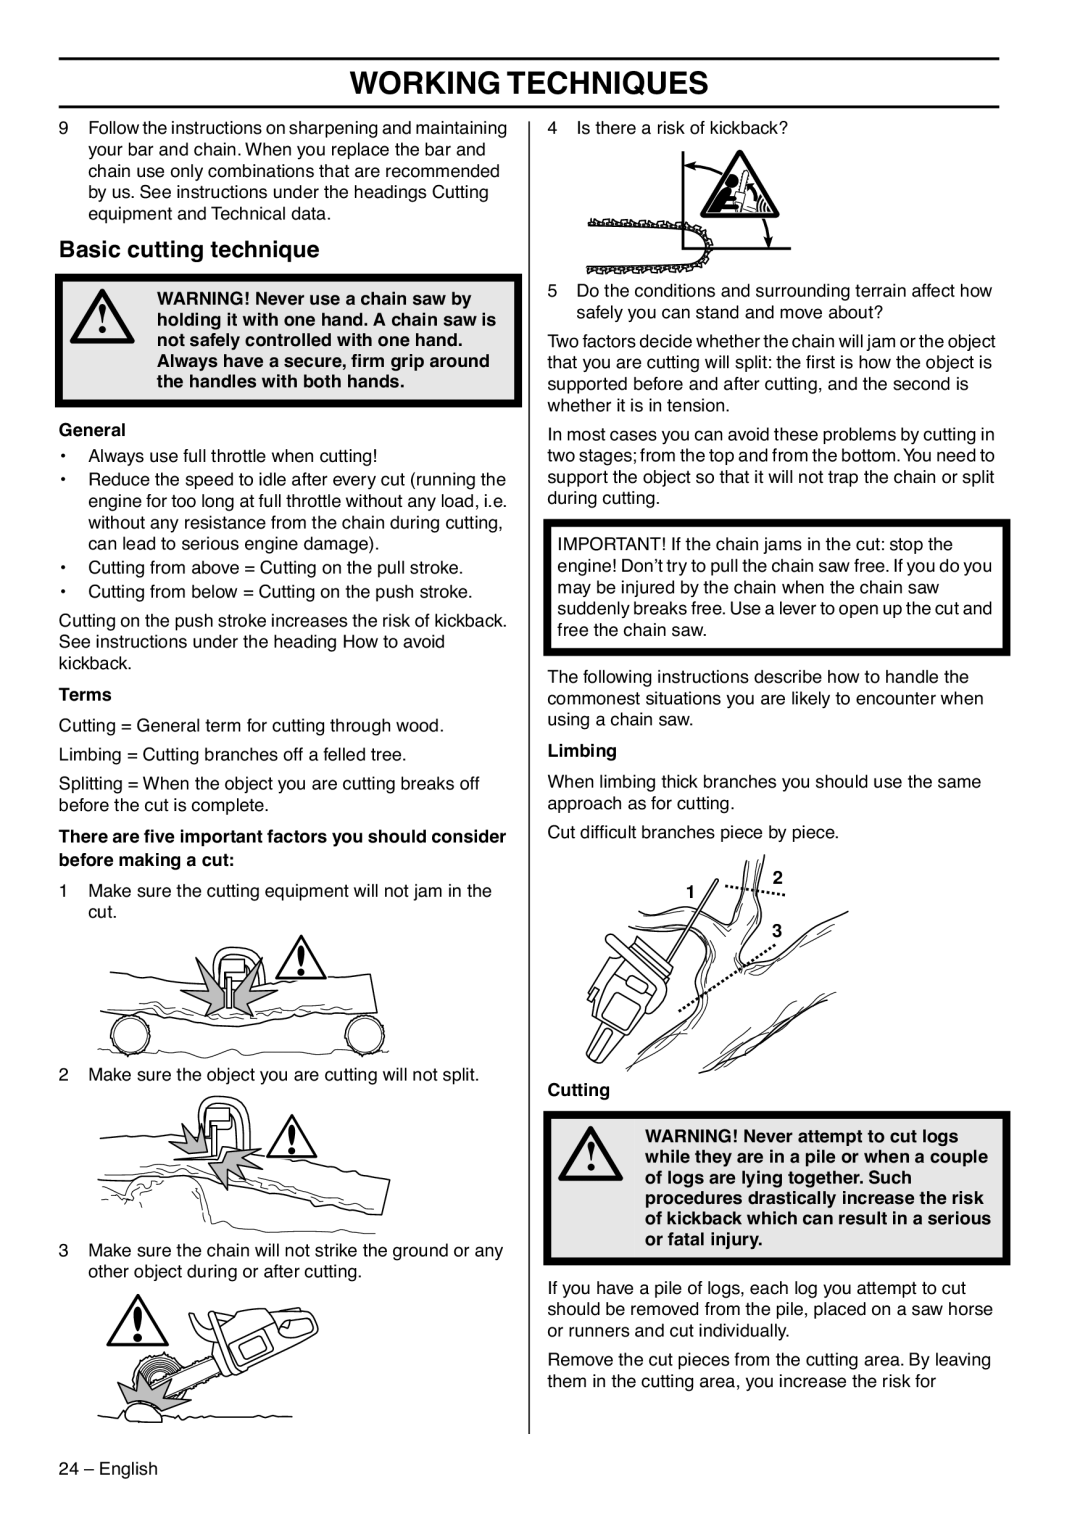 Husqvarna 1153183-26 manual Basic cutting technique, WARNING! Never use a chain saw by, General, Terms, Limbing 